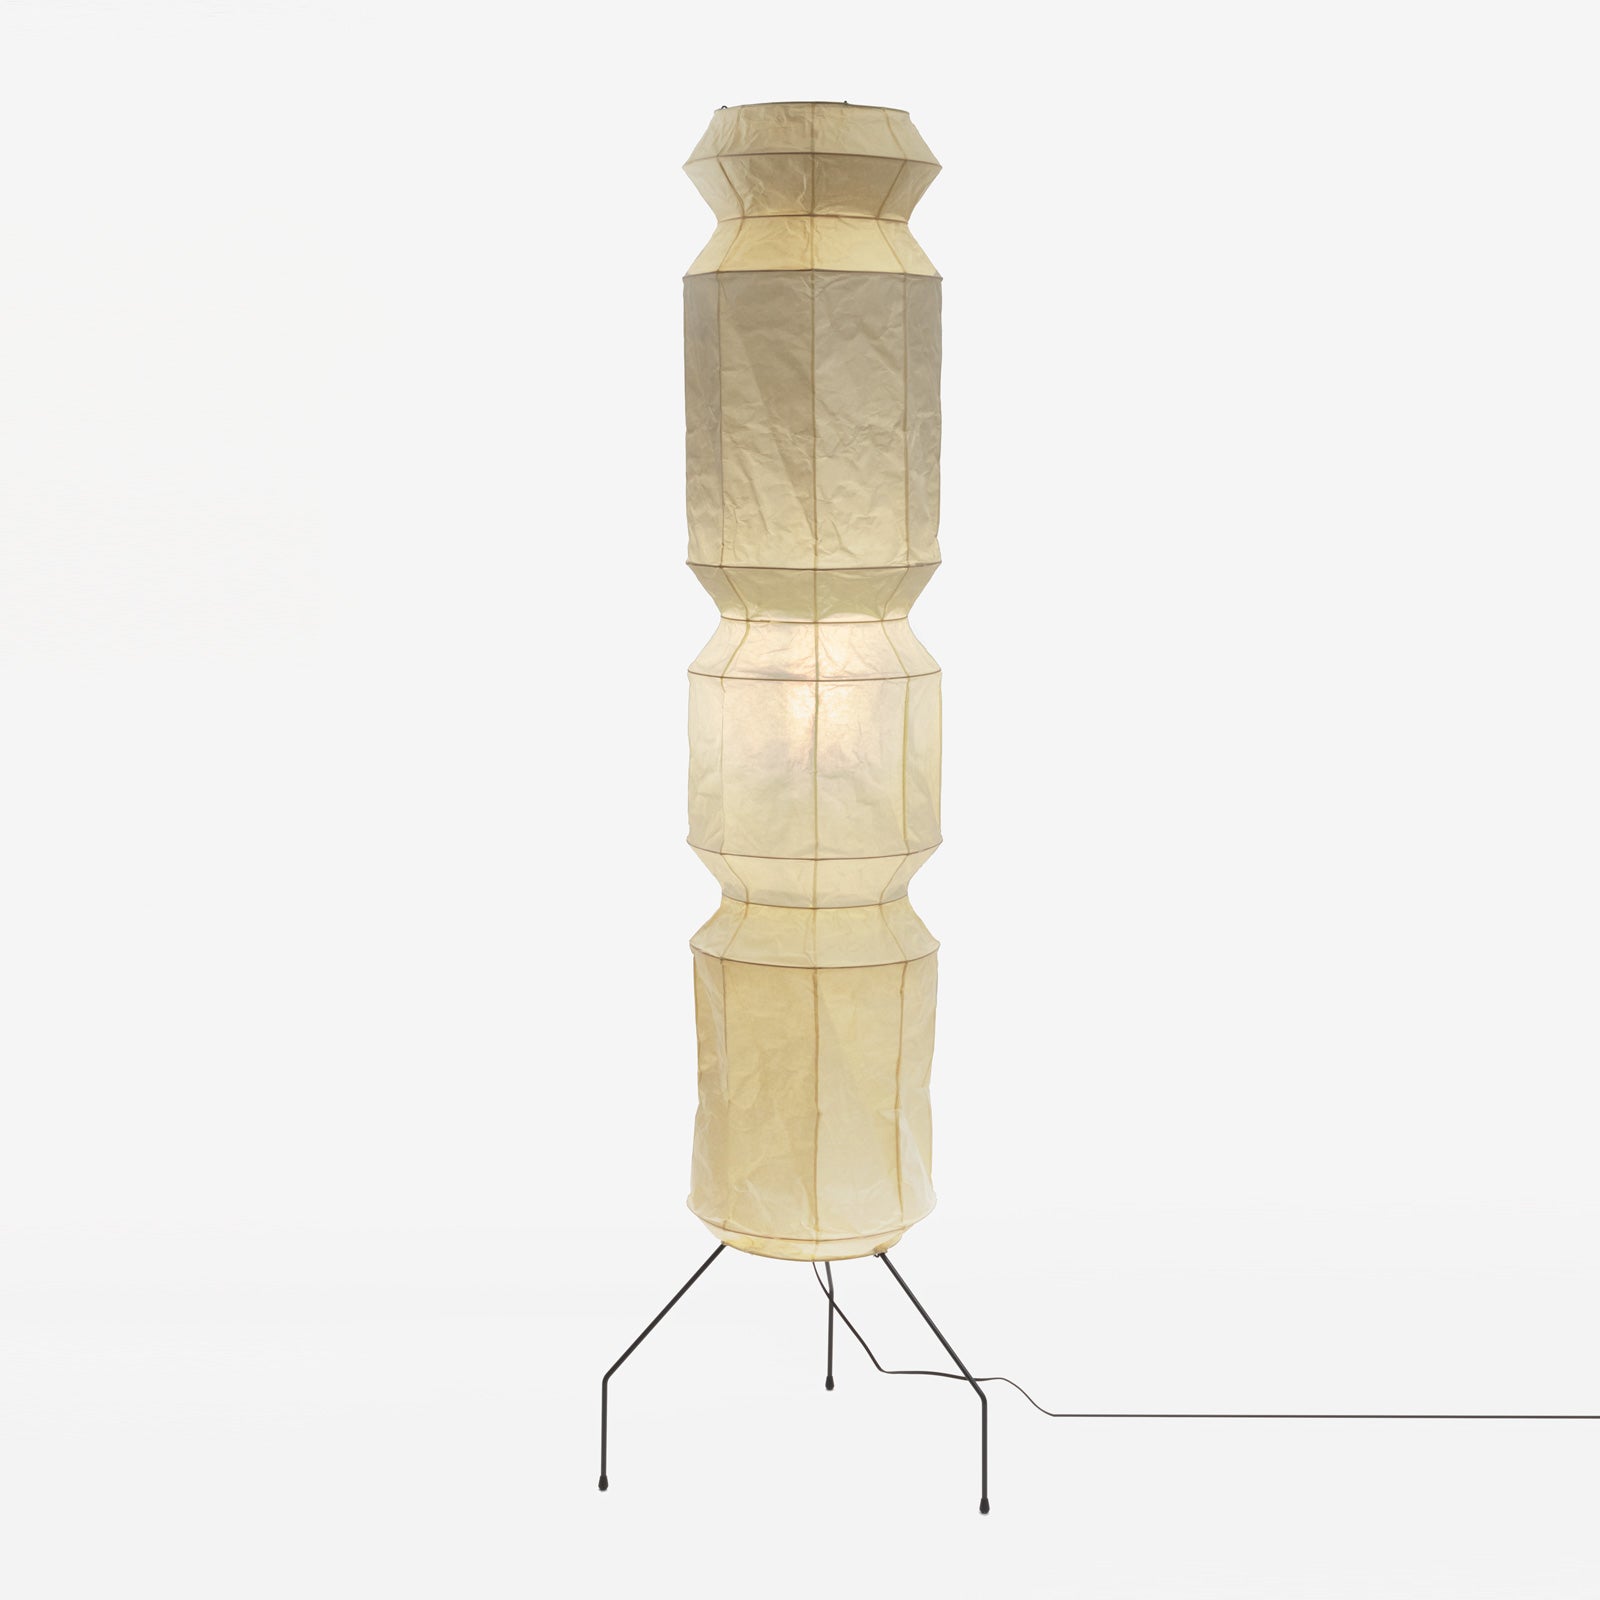 Fish Lamp, Important Design: from Noguchi to Lalanne, 2021